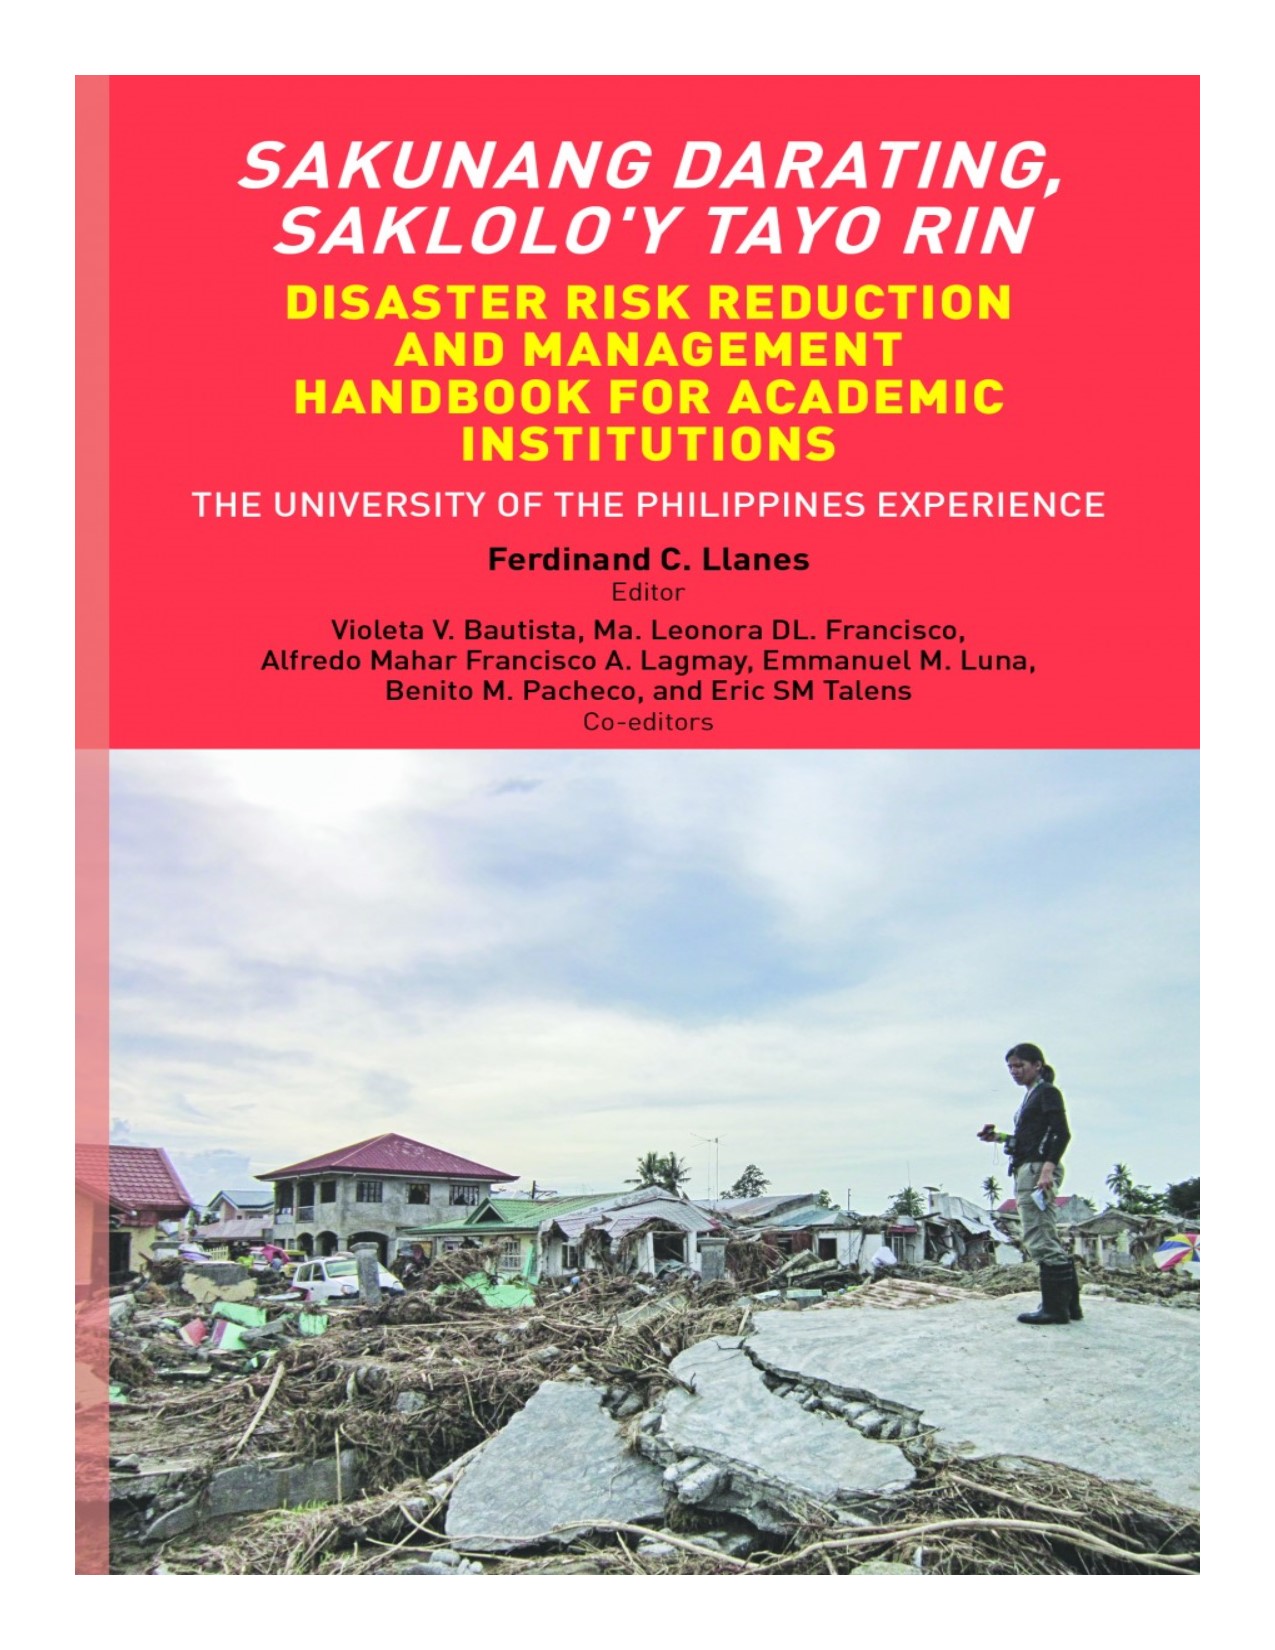 Sakunang darating, saklolo'y tayo rin disaster risk reduction and management handbook for academic institutions : the University of the Philippines experience